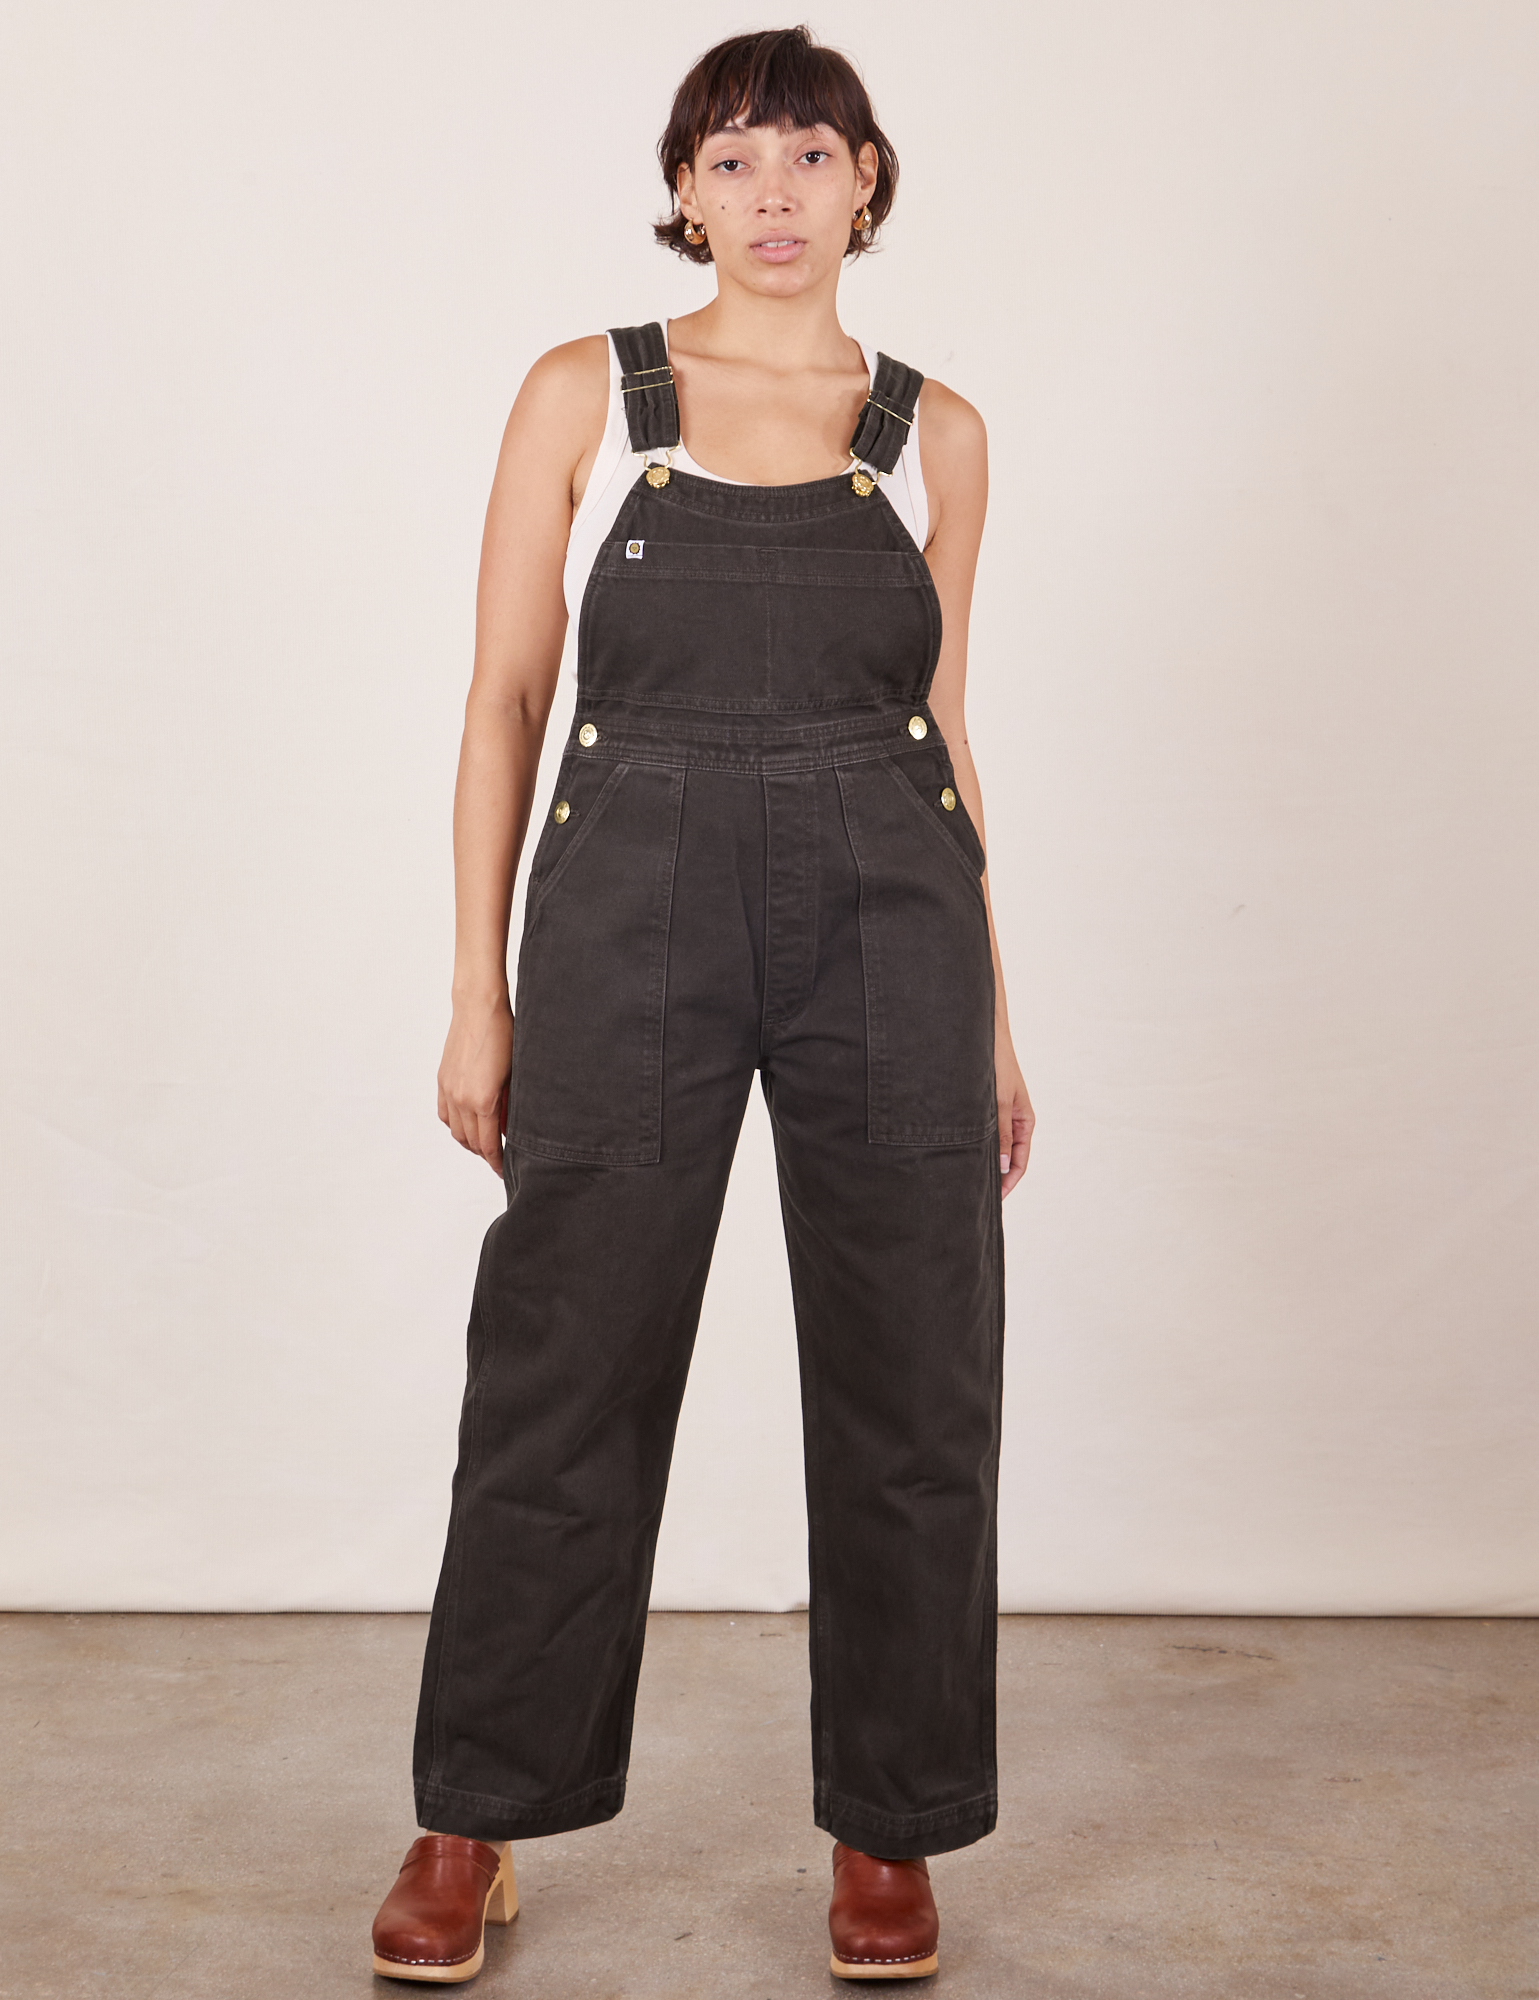 Tiara is 5&#39;4&quot; and wearing size XS Original Overalls in Mono Espresso with a Cropped Tank Top in vintage tee off-white underneath.